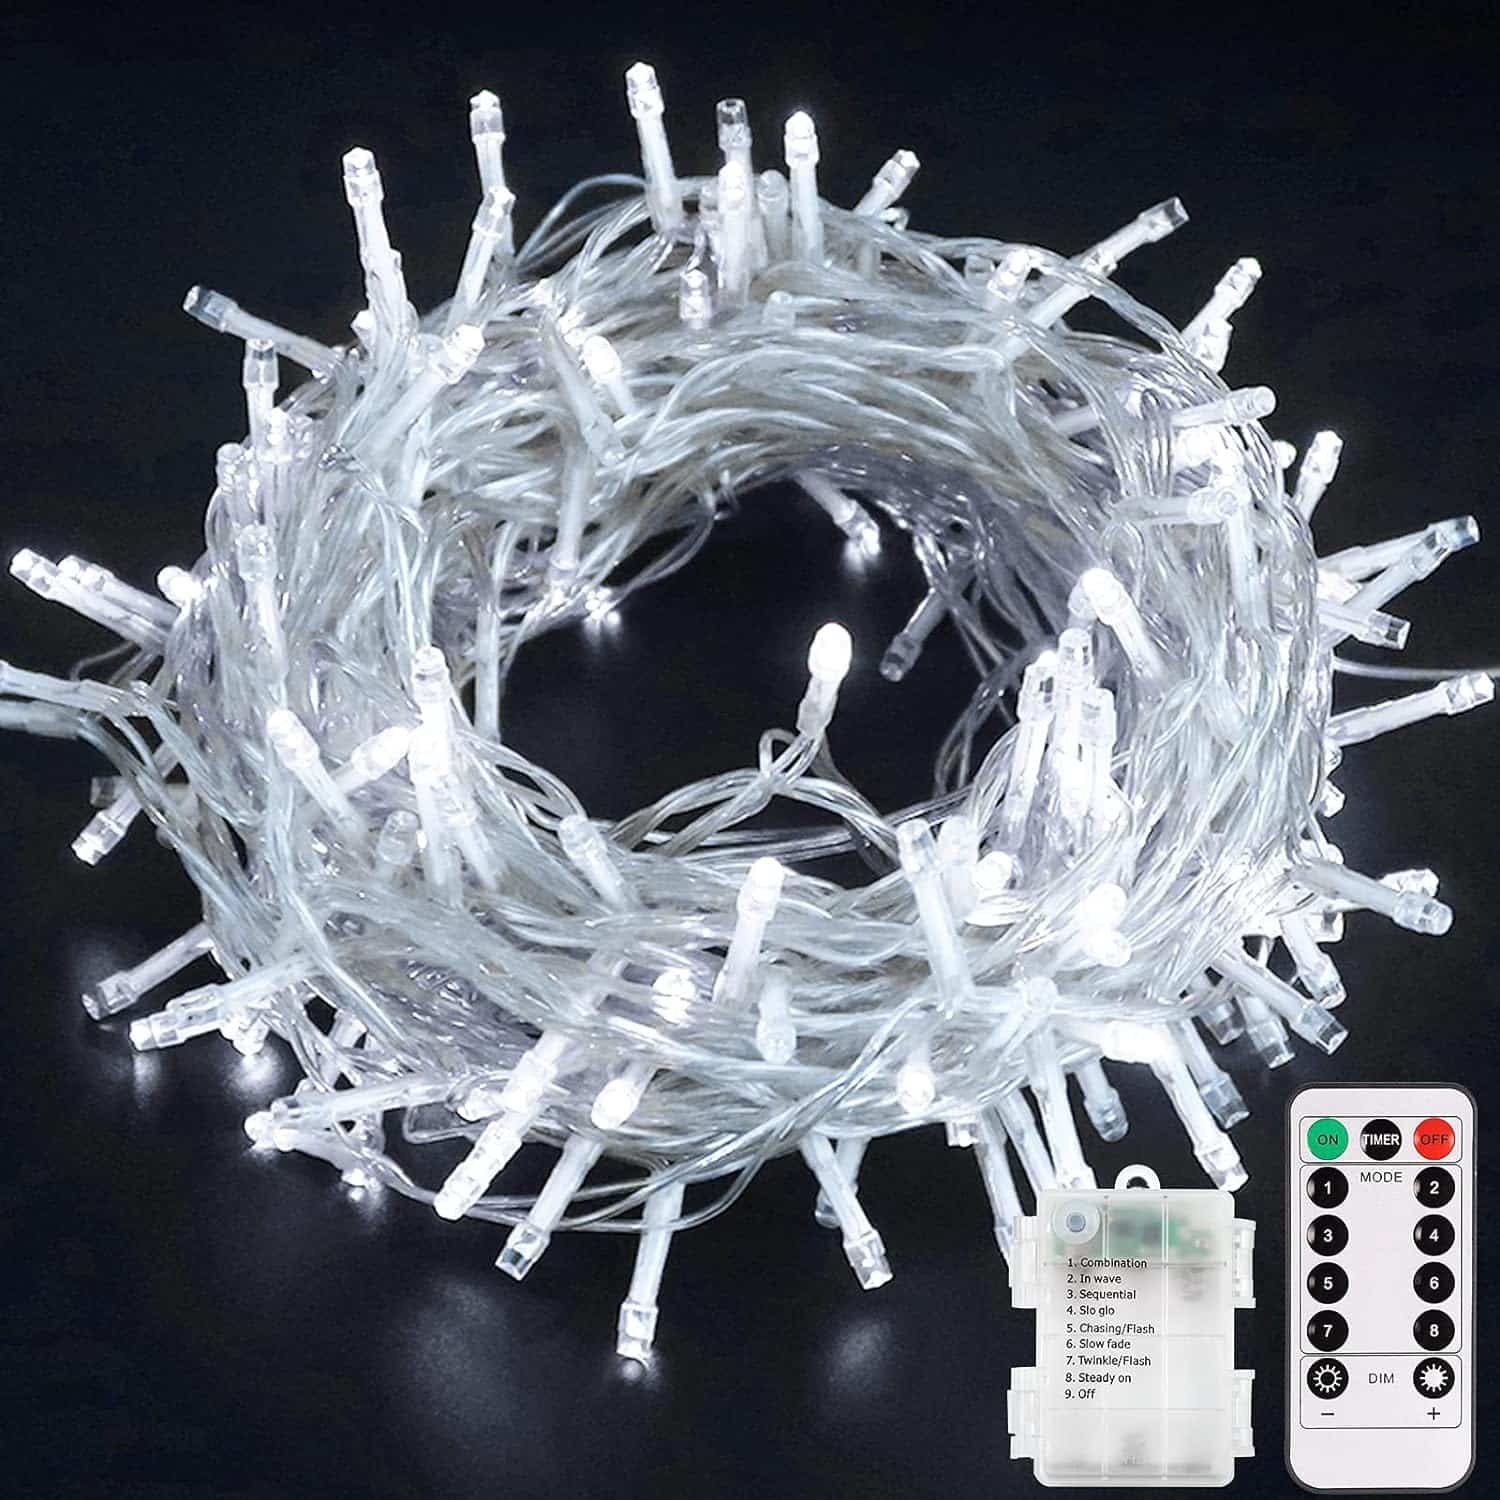 echosari String Lights Battery Powered, 33Ft 100 LED Warm White Outdoor Fairy String Lights with Remote Dimmable Timer 8 Modes for Wedding Party Garden Decoration